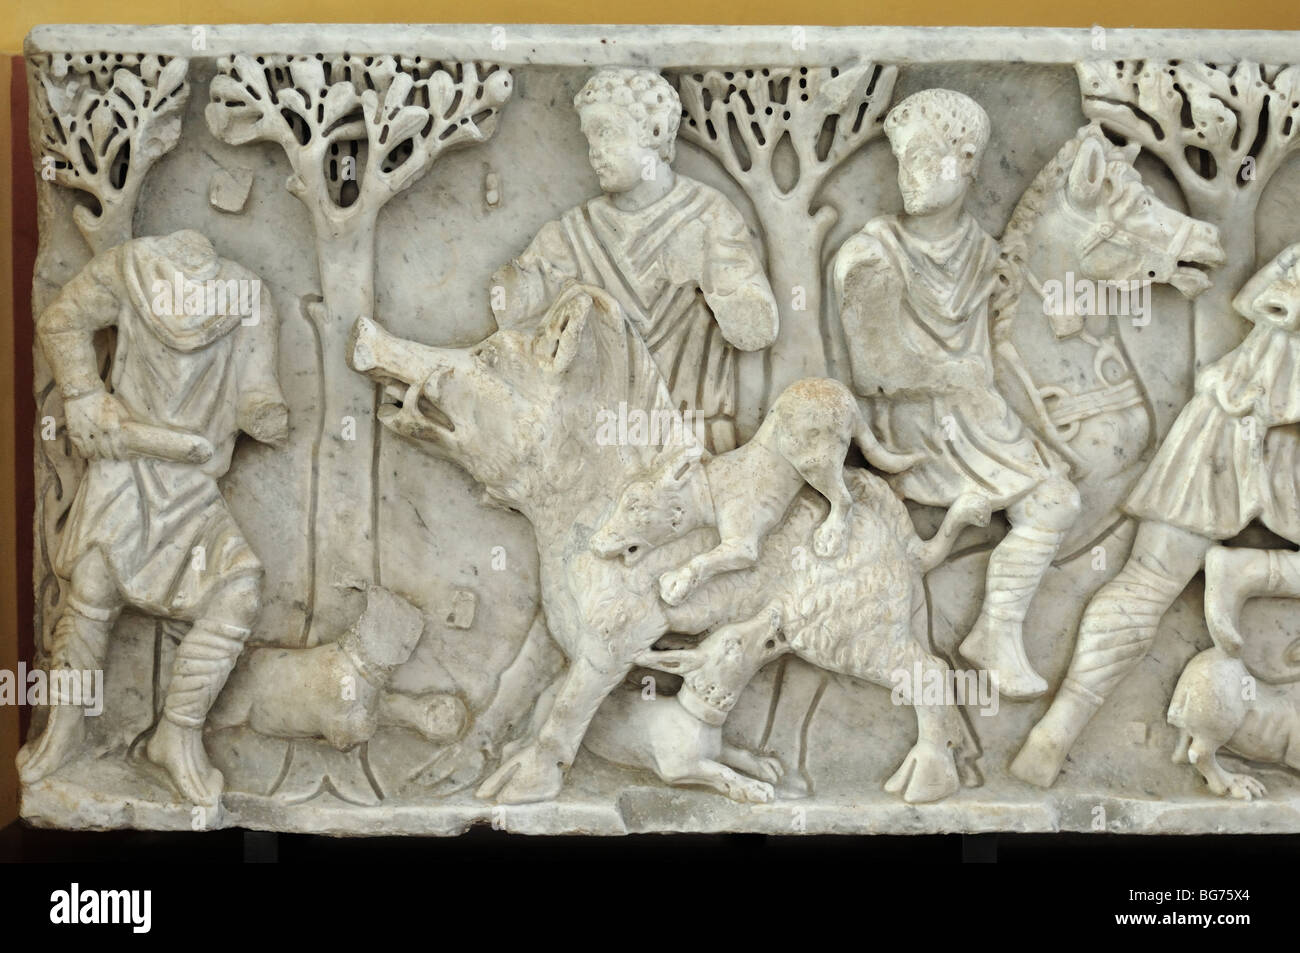 Sanglier or Boar Hunting Scene, Marble Carving from Alyscamps, Roman Sarcophagus or Tomb, c3rd AD, Arles Antique Museum, Provence, France Stock Photo